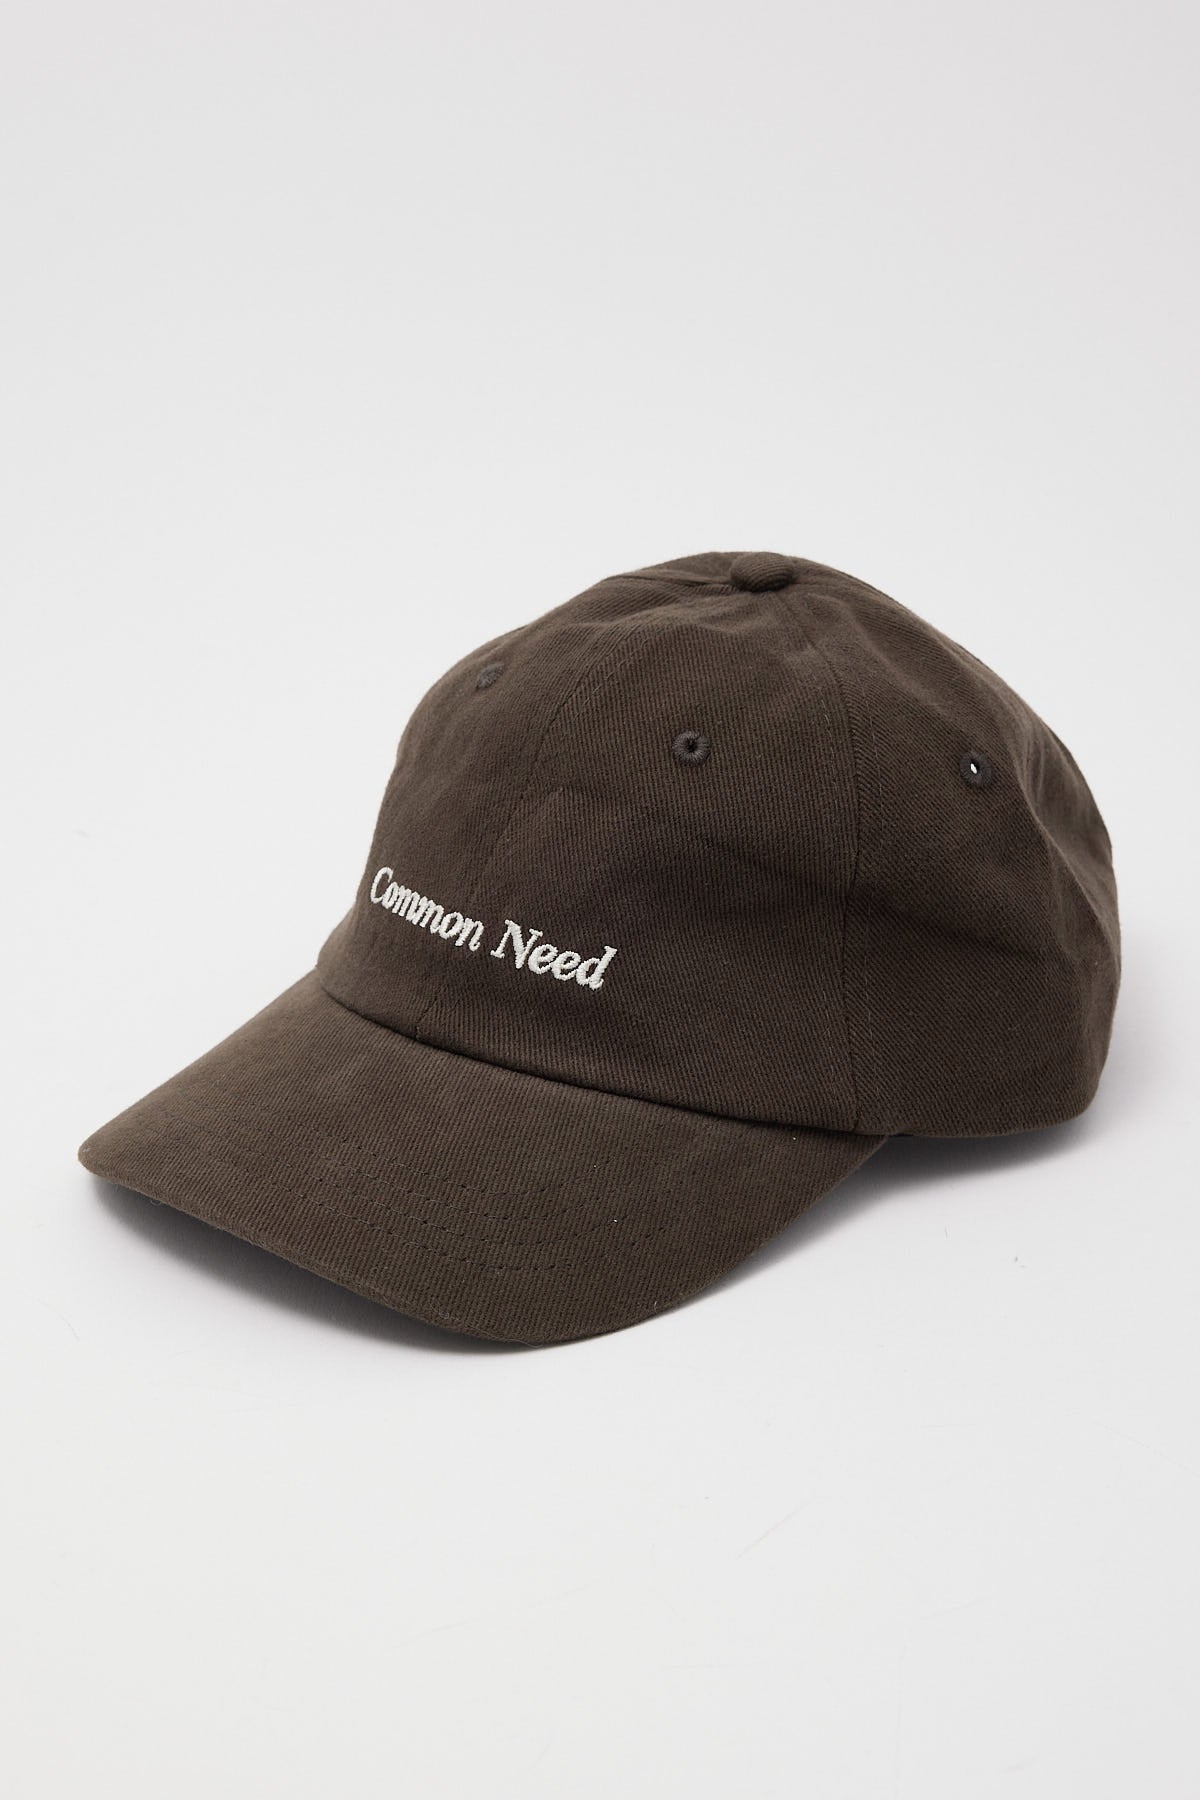 Common Need Accord Dad Cap Taupe